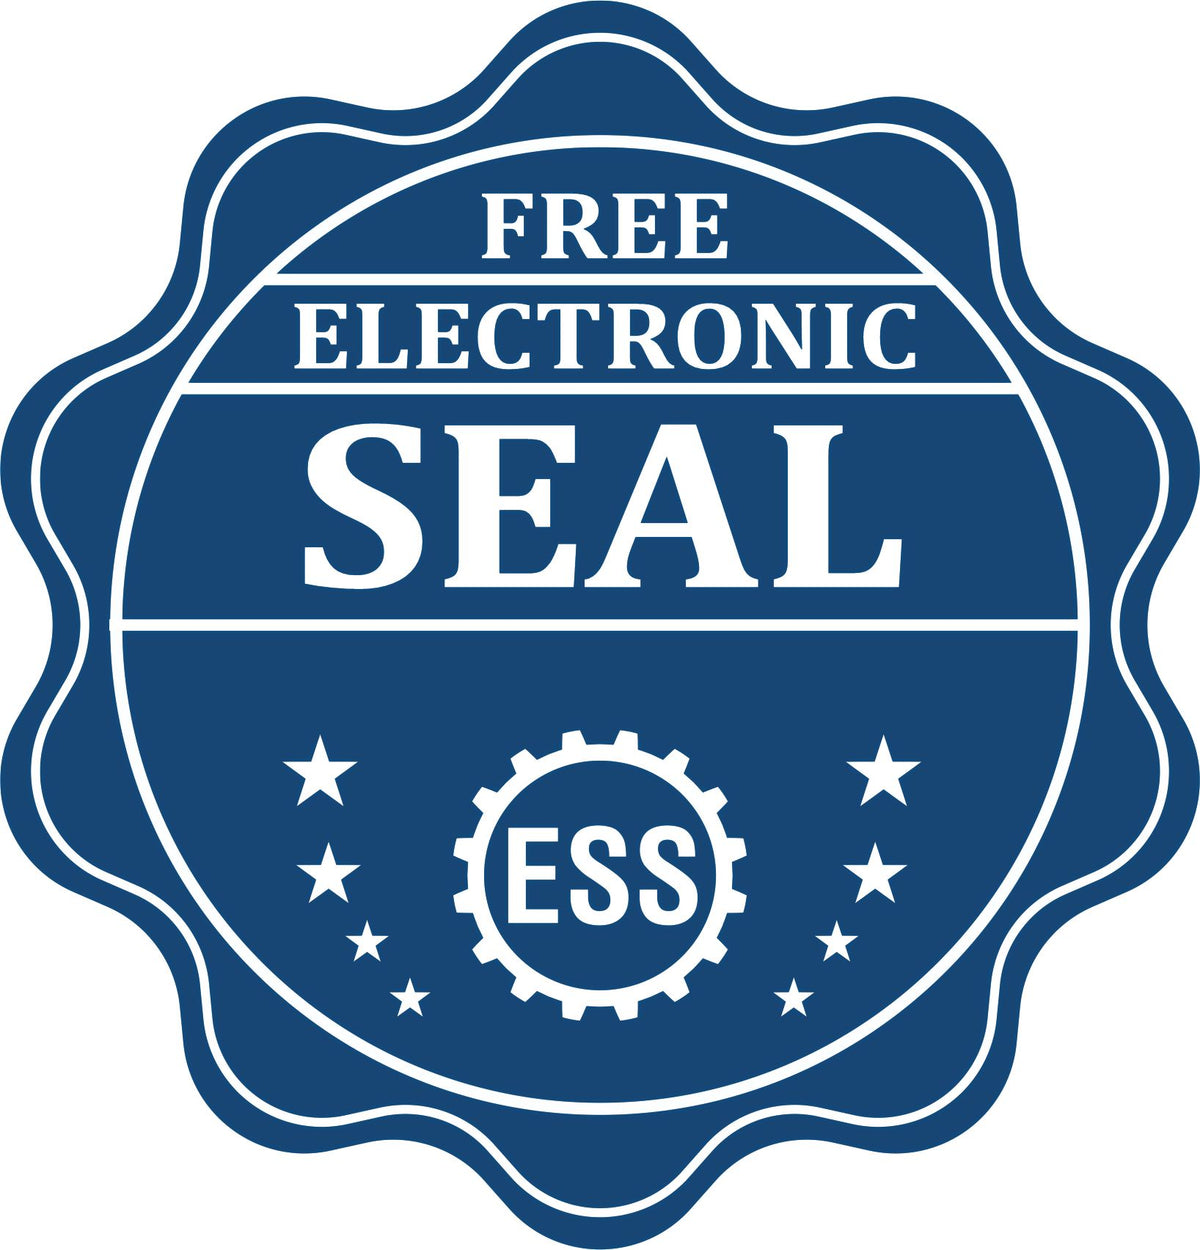 A badge showing a free electronic seal for the State of Michigan Long Reach Architectural Embossing Seal with stars and the ESS gear on the emblem.